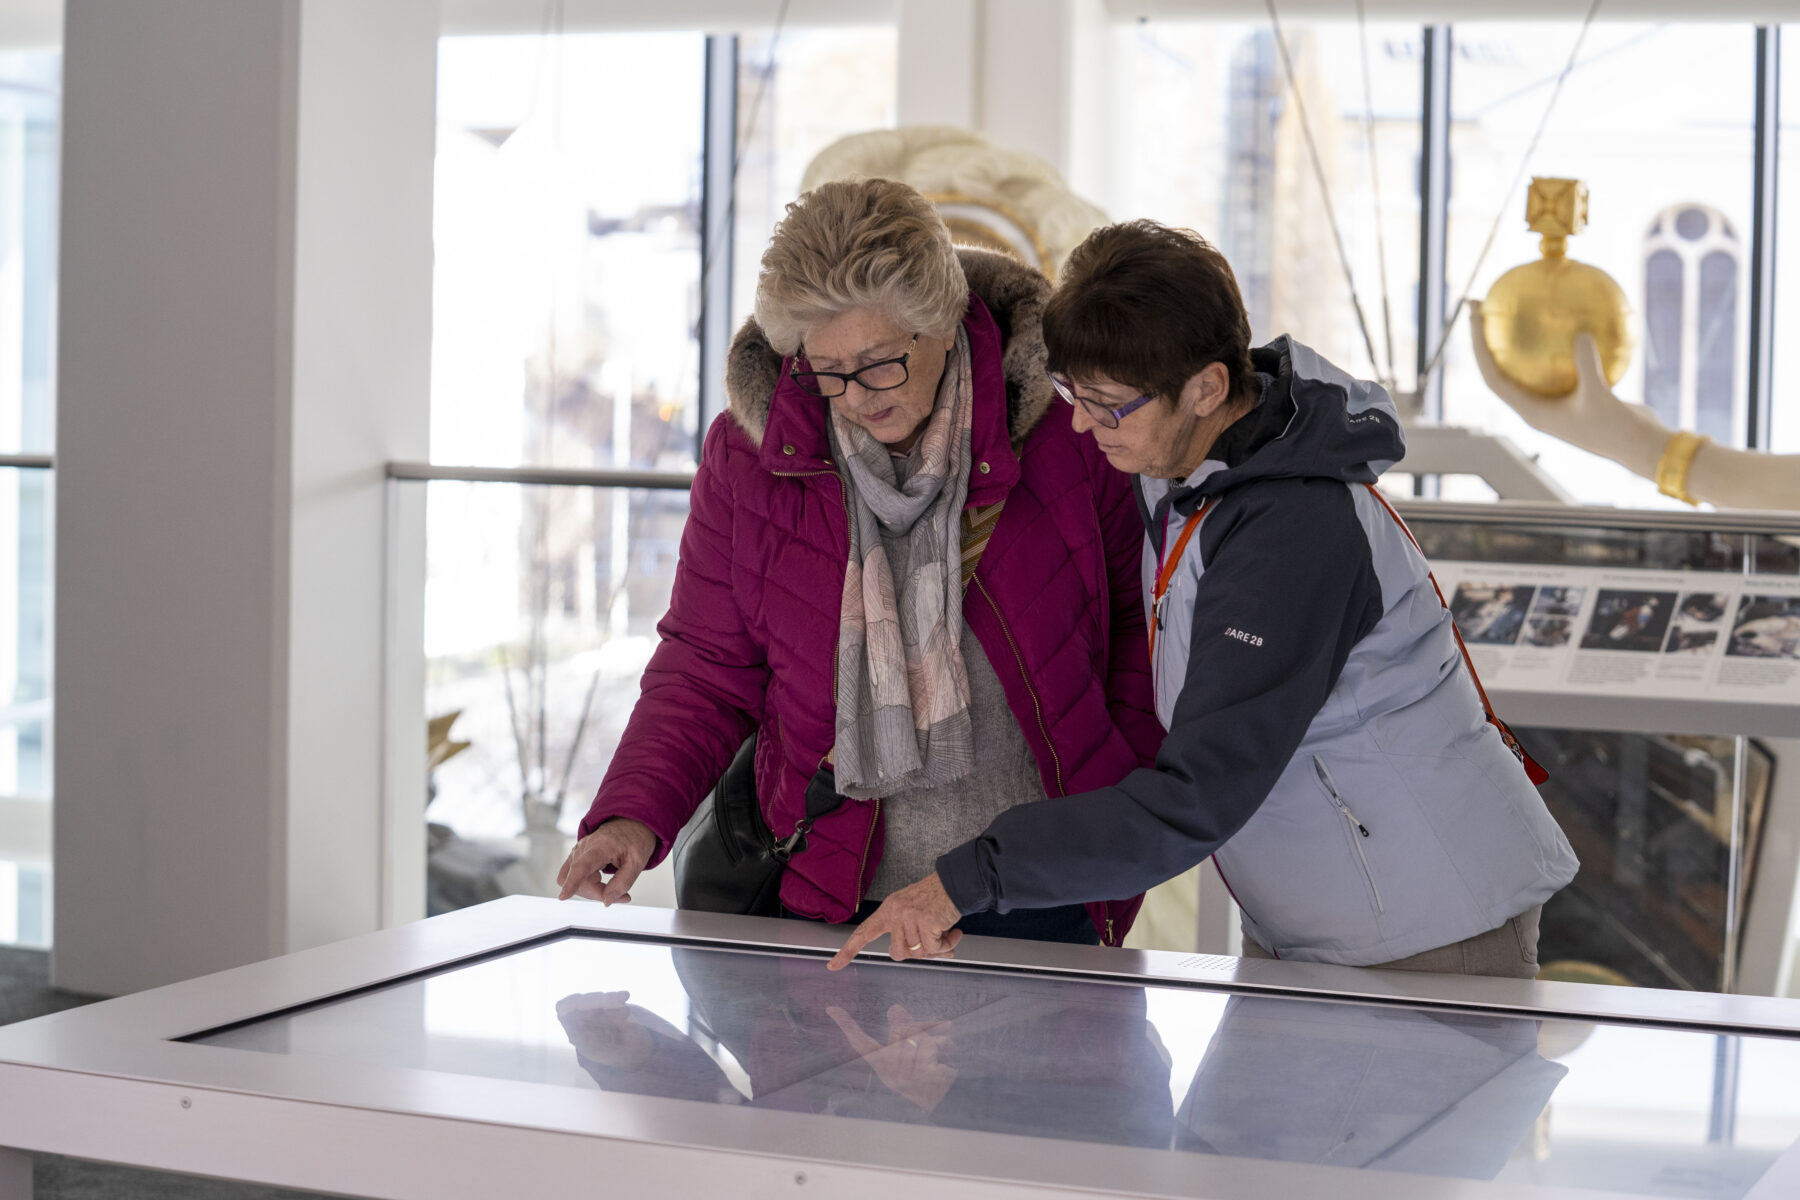 Two women look at an interactive display